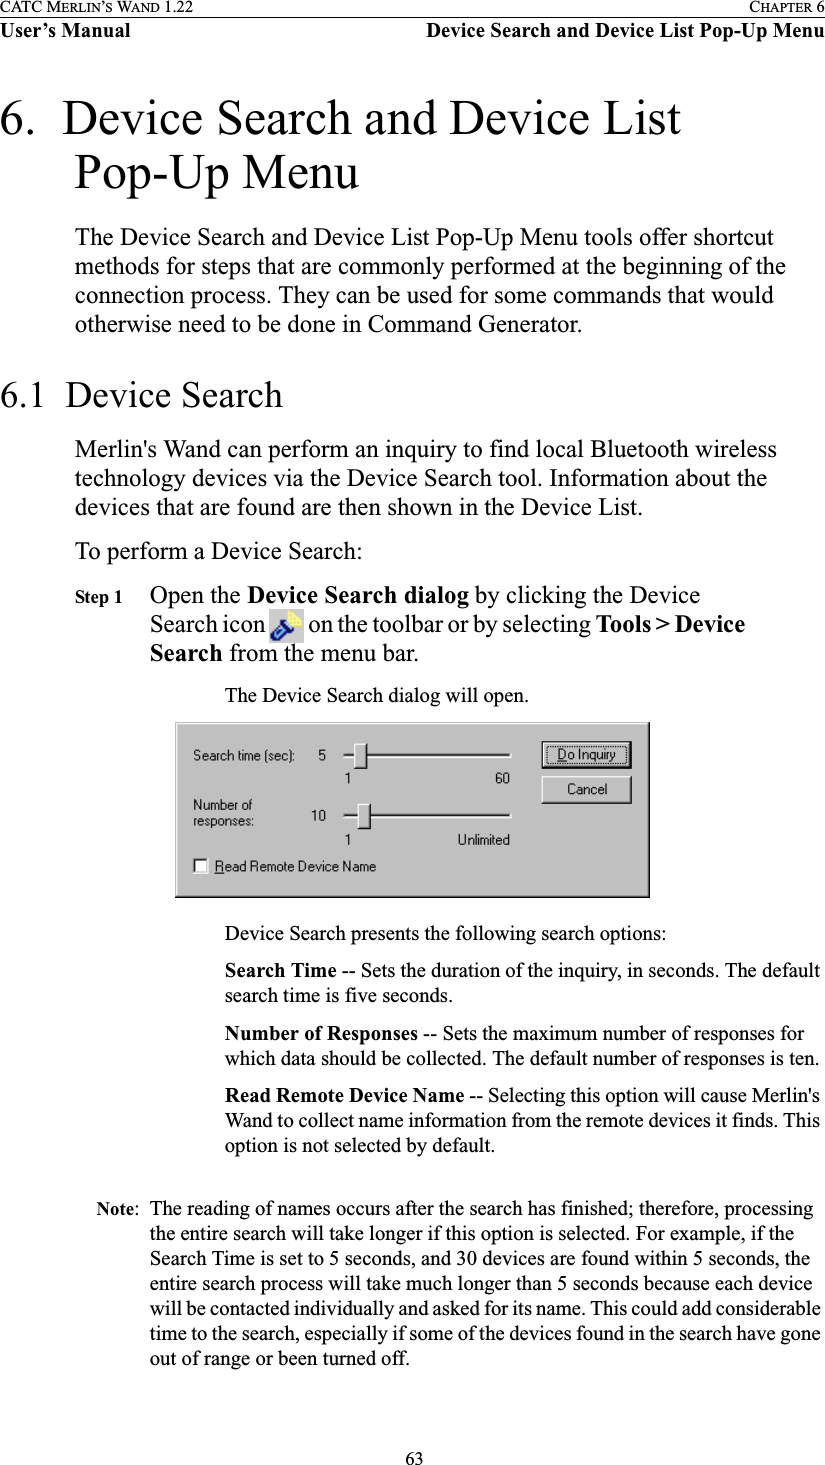  63CATC MERLIN’S WAND 1.22 CHAPTER 6User’s Manual Device Search and Device List Pop-Up Menu6.  Device Search and Device List Pop-Up MenuThe Device Search and Device List Pop-Up Menu tools offer shortcut methods for steps that are commonly performed at the beginning of the connection process. They can be used for some commands that would otherwise need to be done in Command Generator.6.1  Device SearchMerlin&apos;s Wand can perform an inquiry to find local Bluetooth wireless technology devices via the Device Search tool. Information about the devices that are found are then shown in the Device List.To perform a Device Search:Step 1 Open the Device Search dialog by clicking the Device Search icon   on the toolbar or by selecting Tools &gt; Device Search from the menu bar.The Device Search dialog will open.Device Search presents the following search options:Search Time -- Sets the duration of the inquiry, in seconds. The default search time is five seconds.Number of Responses -- Sets the maximum number of responses for which data should be collected. The default number of responses is ten.Read Remote Device Name -- Selecting this option will cause Merlin&apos;s Wand to collect name information from the remote devices it finds. This option is not selected by default.Note: The reading of names occurs after the search has finished; therefore, processing the entire search will take longer if this option is selected. For example, if the Search Time is set to 5 seconds, and 30 devices are found within 5 seconds, the entire search process will take much longer than 5 seconds because each device will be contacted individually and asked for its name. This could add considerable time to the search, especially if some of the devices found in the search have gone out of range or been turned off.